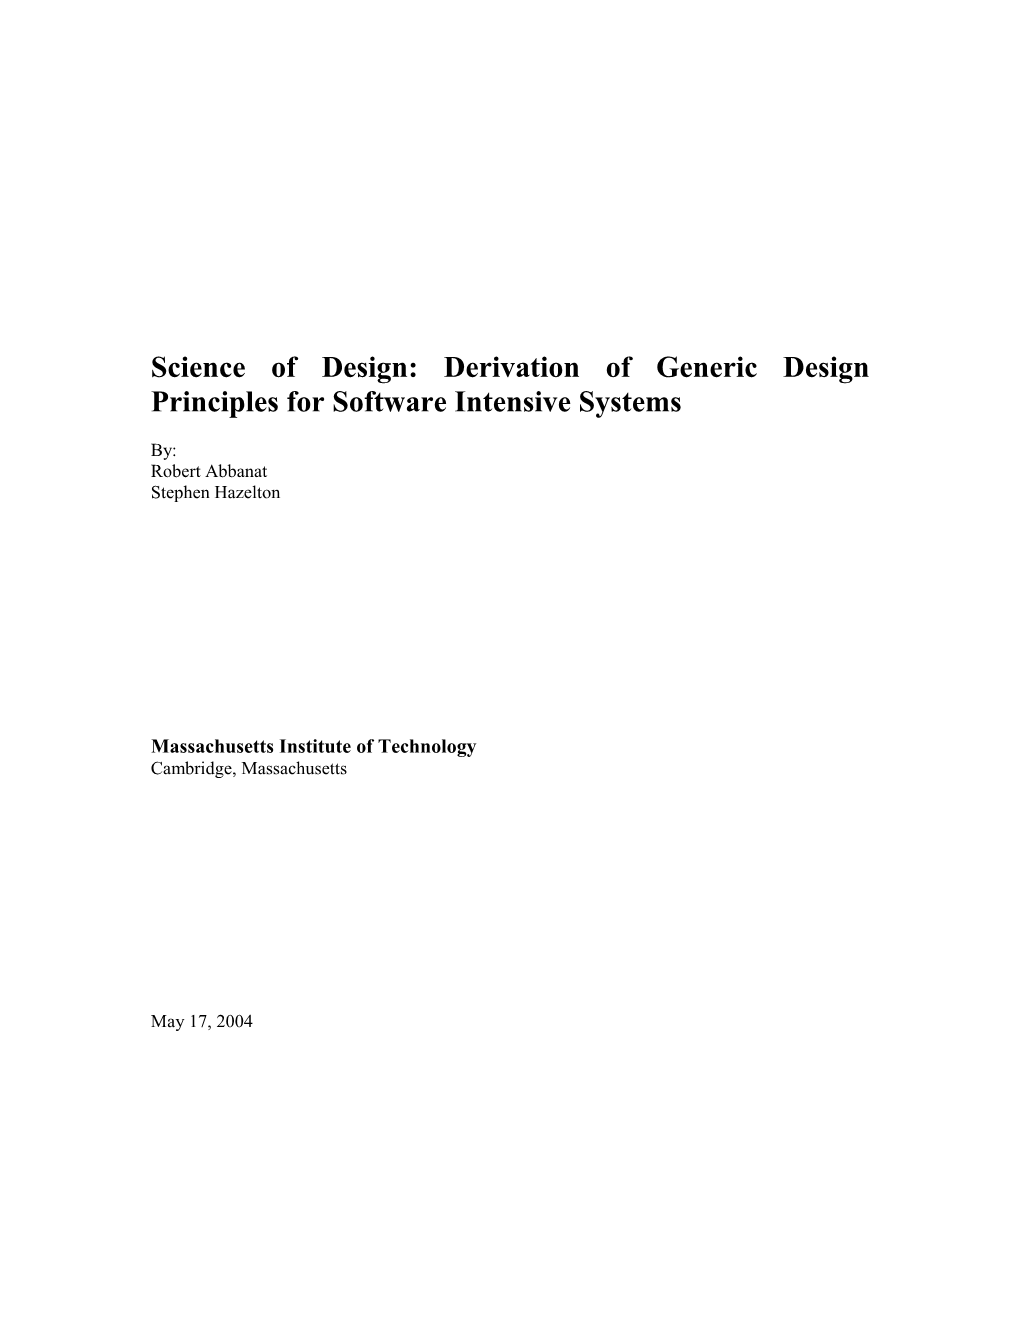 Science of Design: Derivation of Generic Design Principles for Software Intensive Systems